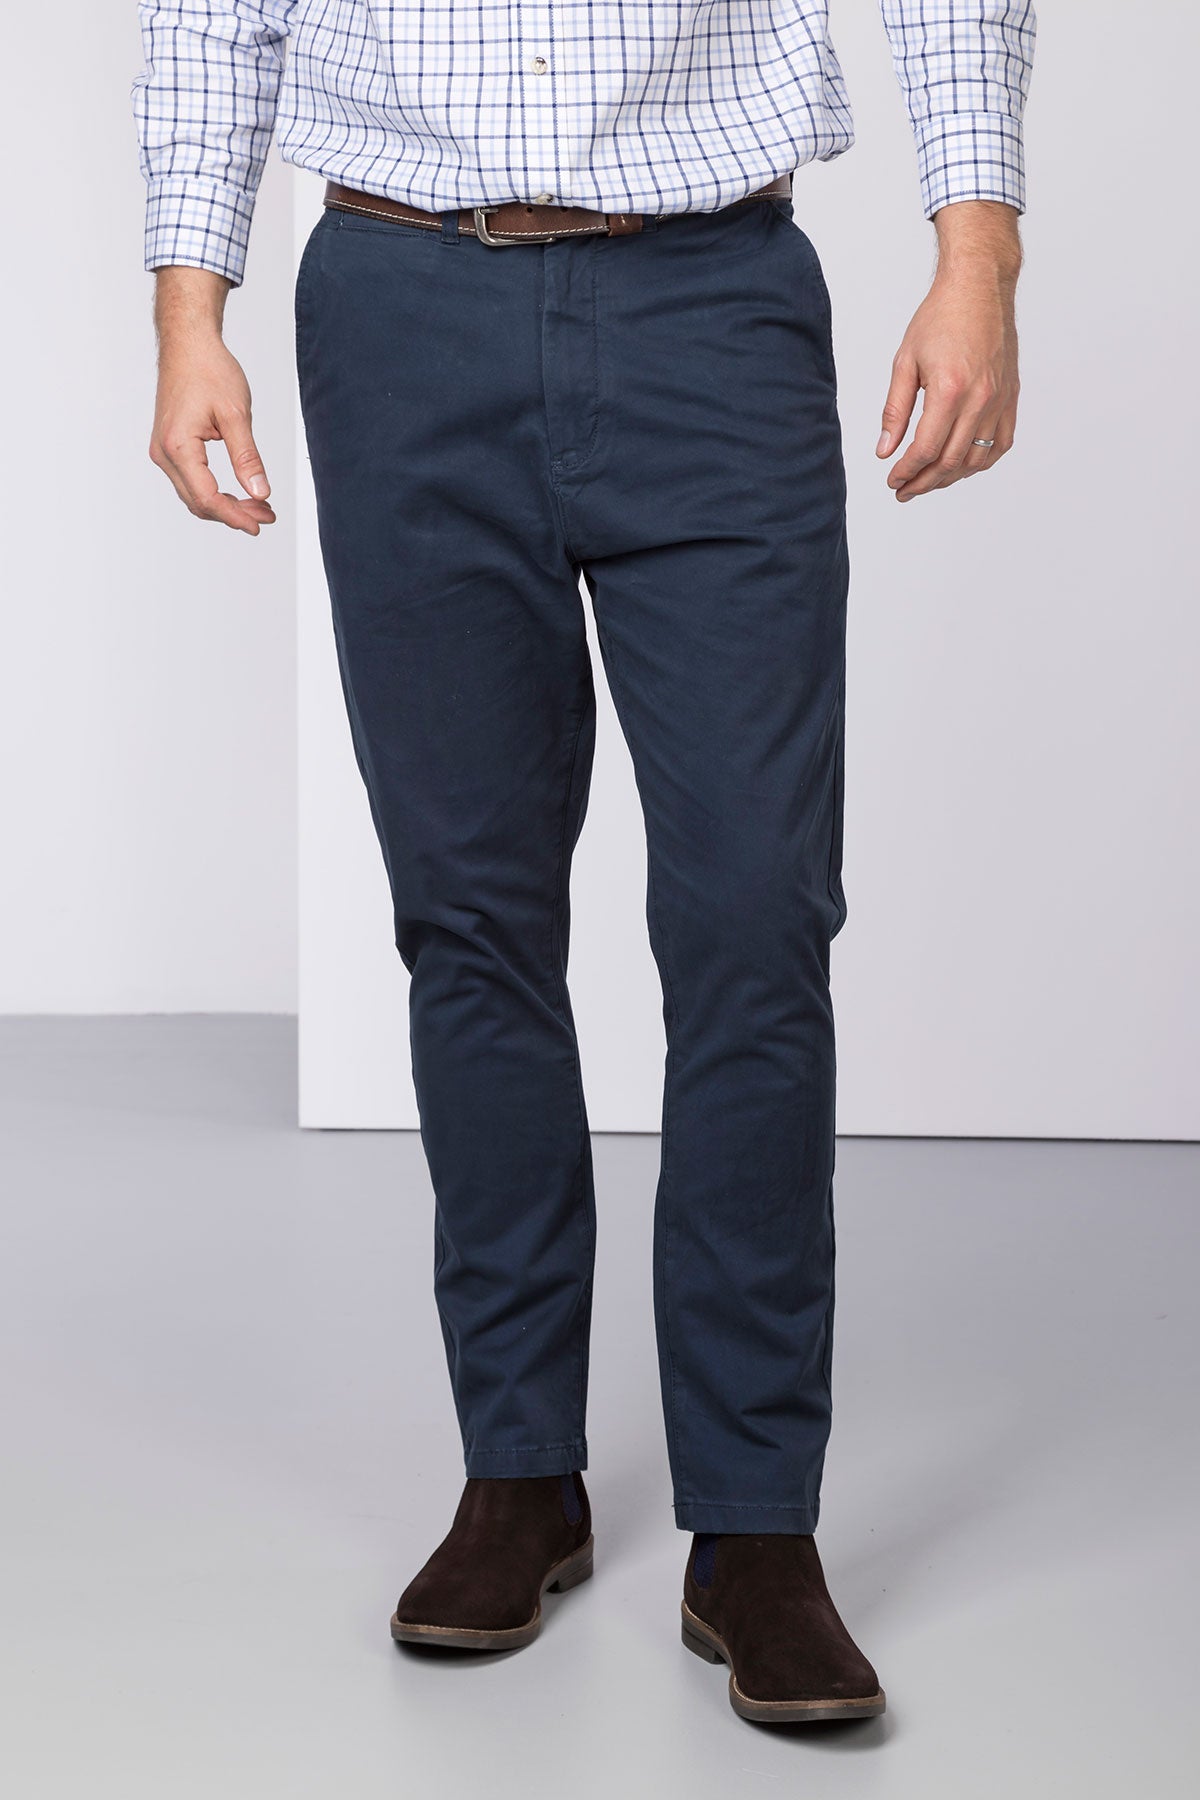 Navy Blue Chino Pants - Oliver Wicks